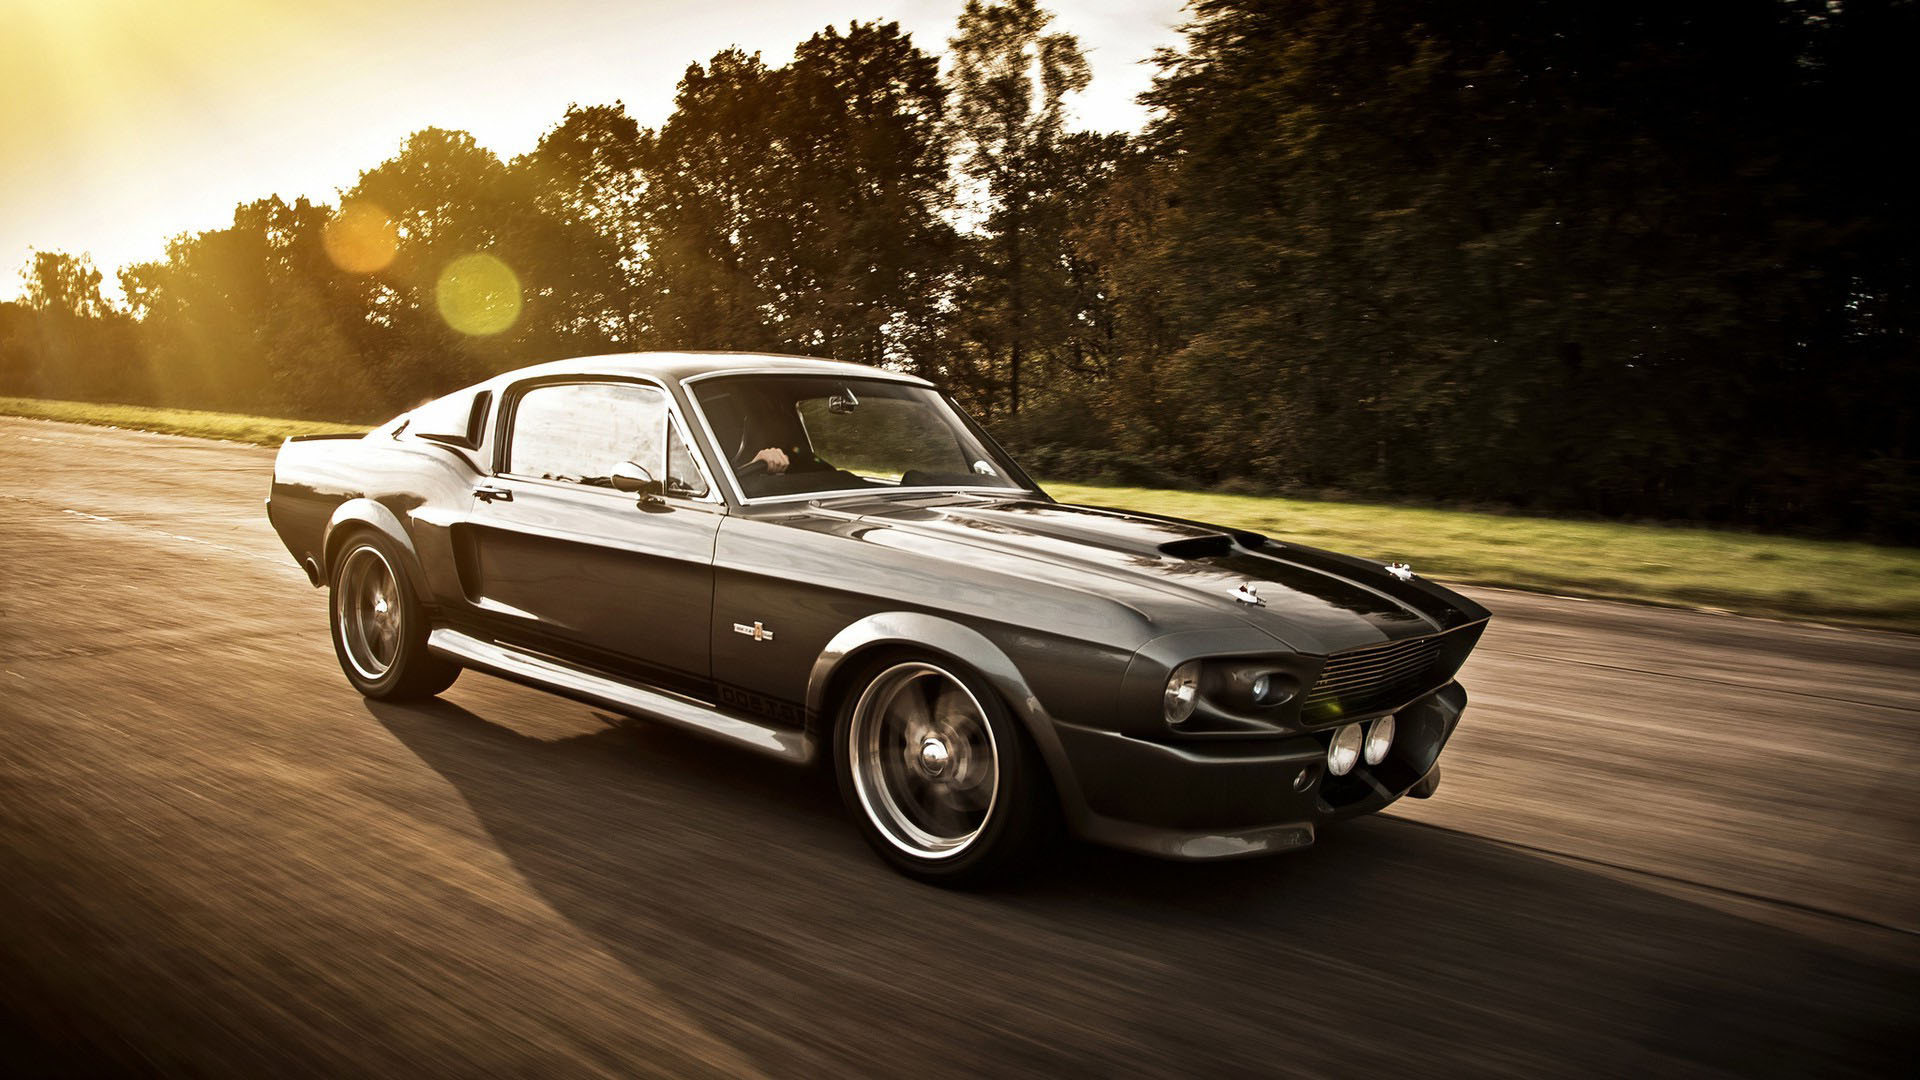 Download Classic Ford Mustang Wallpaper Hd All About - Old Mustang